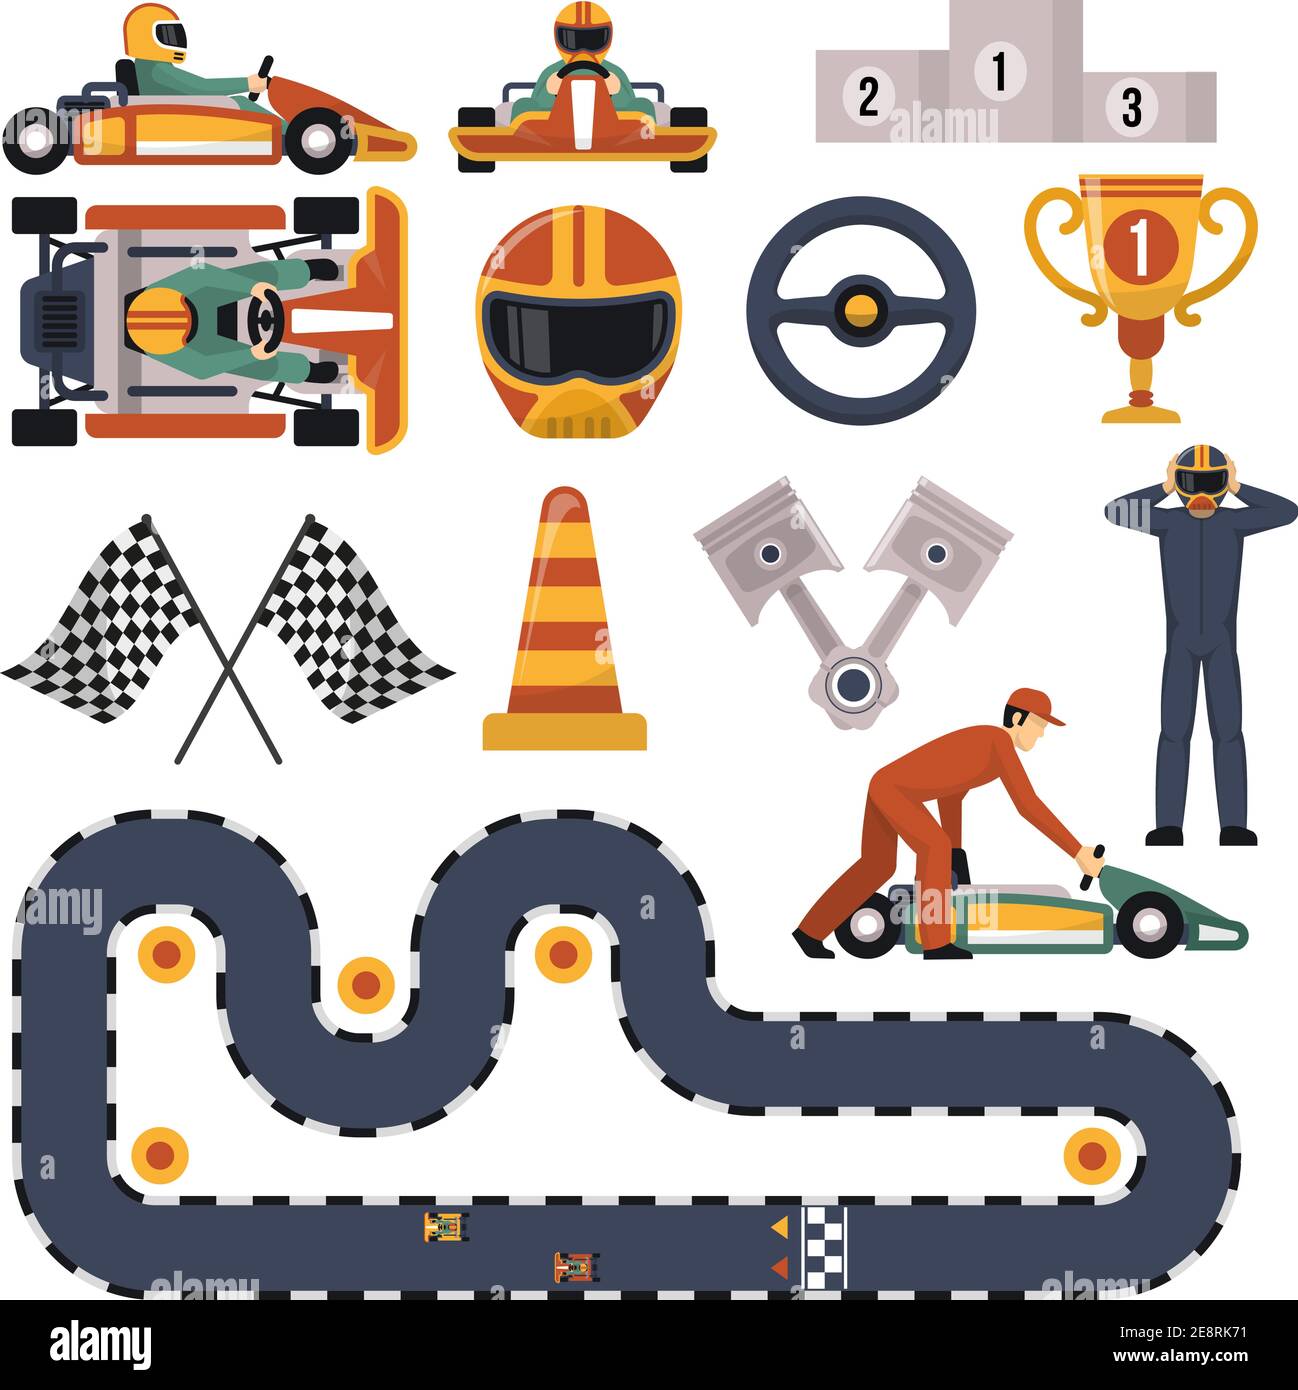 Flat design karting motor race track apparel equipment and drivers set isolated on white background vector illustration Stock Vector